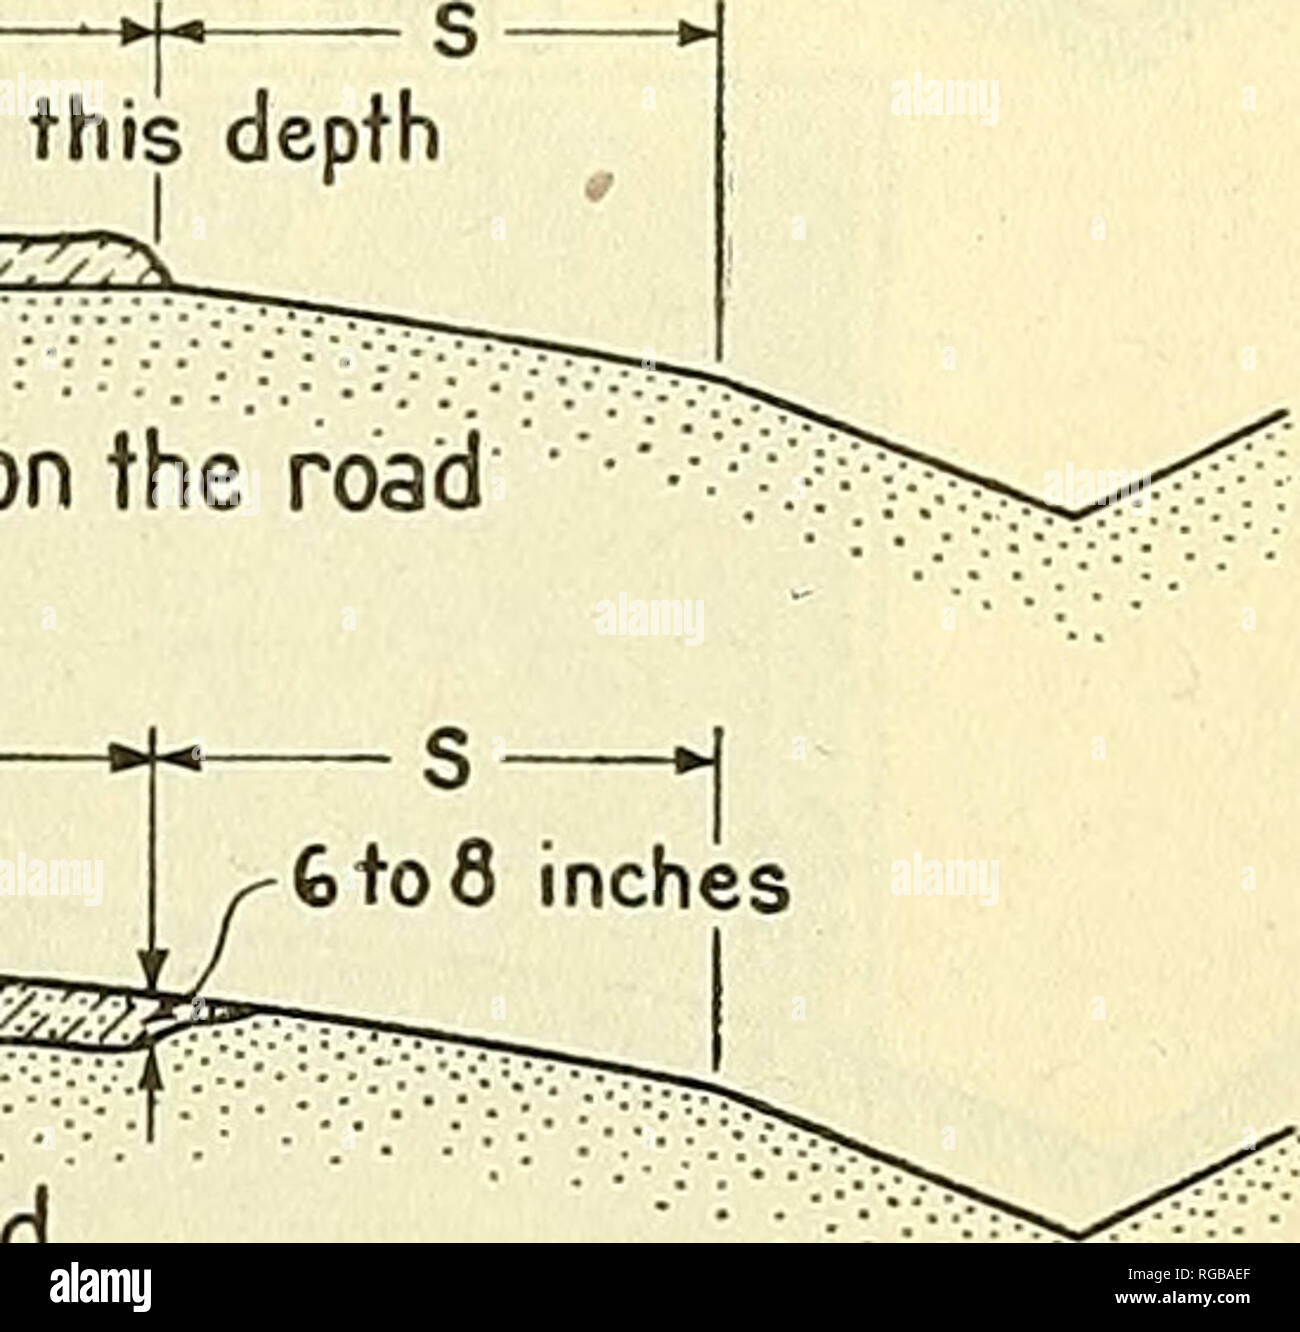 Bulletin of the U.S. Department of Agriculture. Agriculture; Agriculture.  Sec text for this depth 4, r- see iexr toi in Cross section showing  material spread on the road ready for mixing